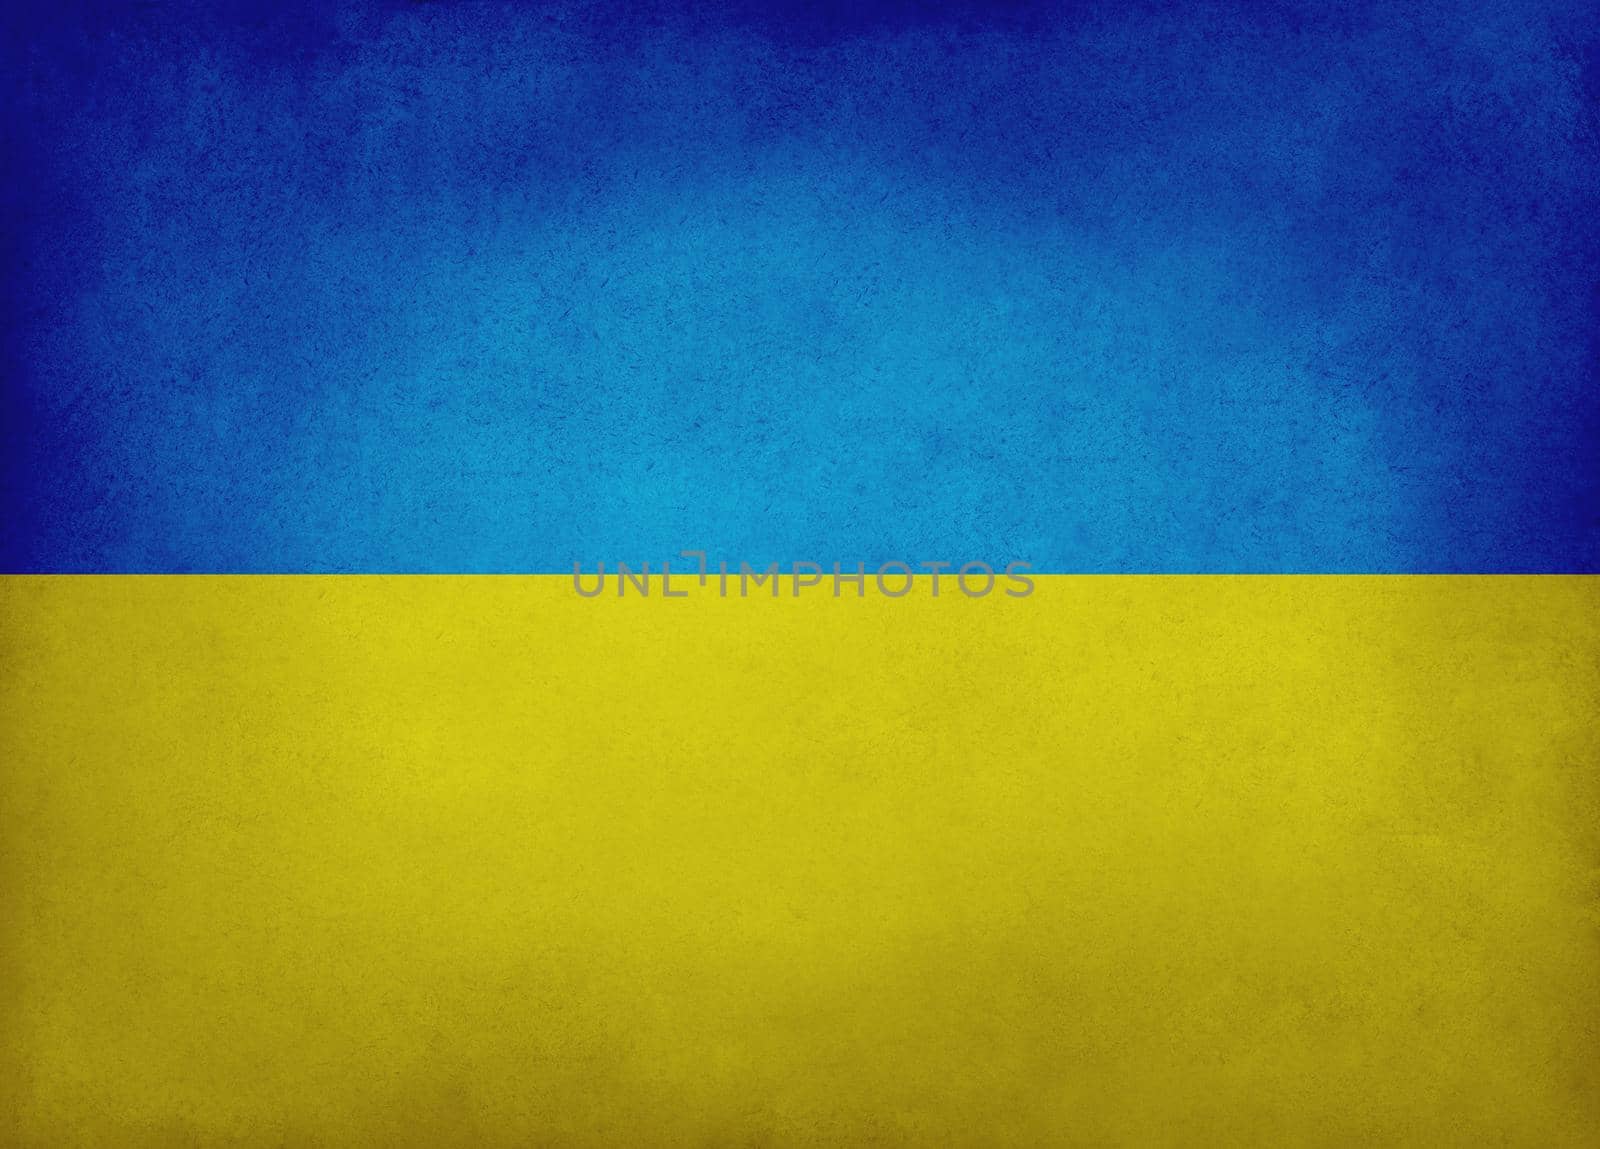 Ukrainian flag blue and yellow colored old paper background with vignette and copy space